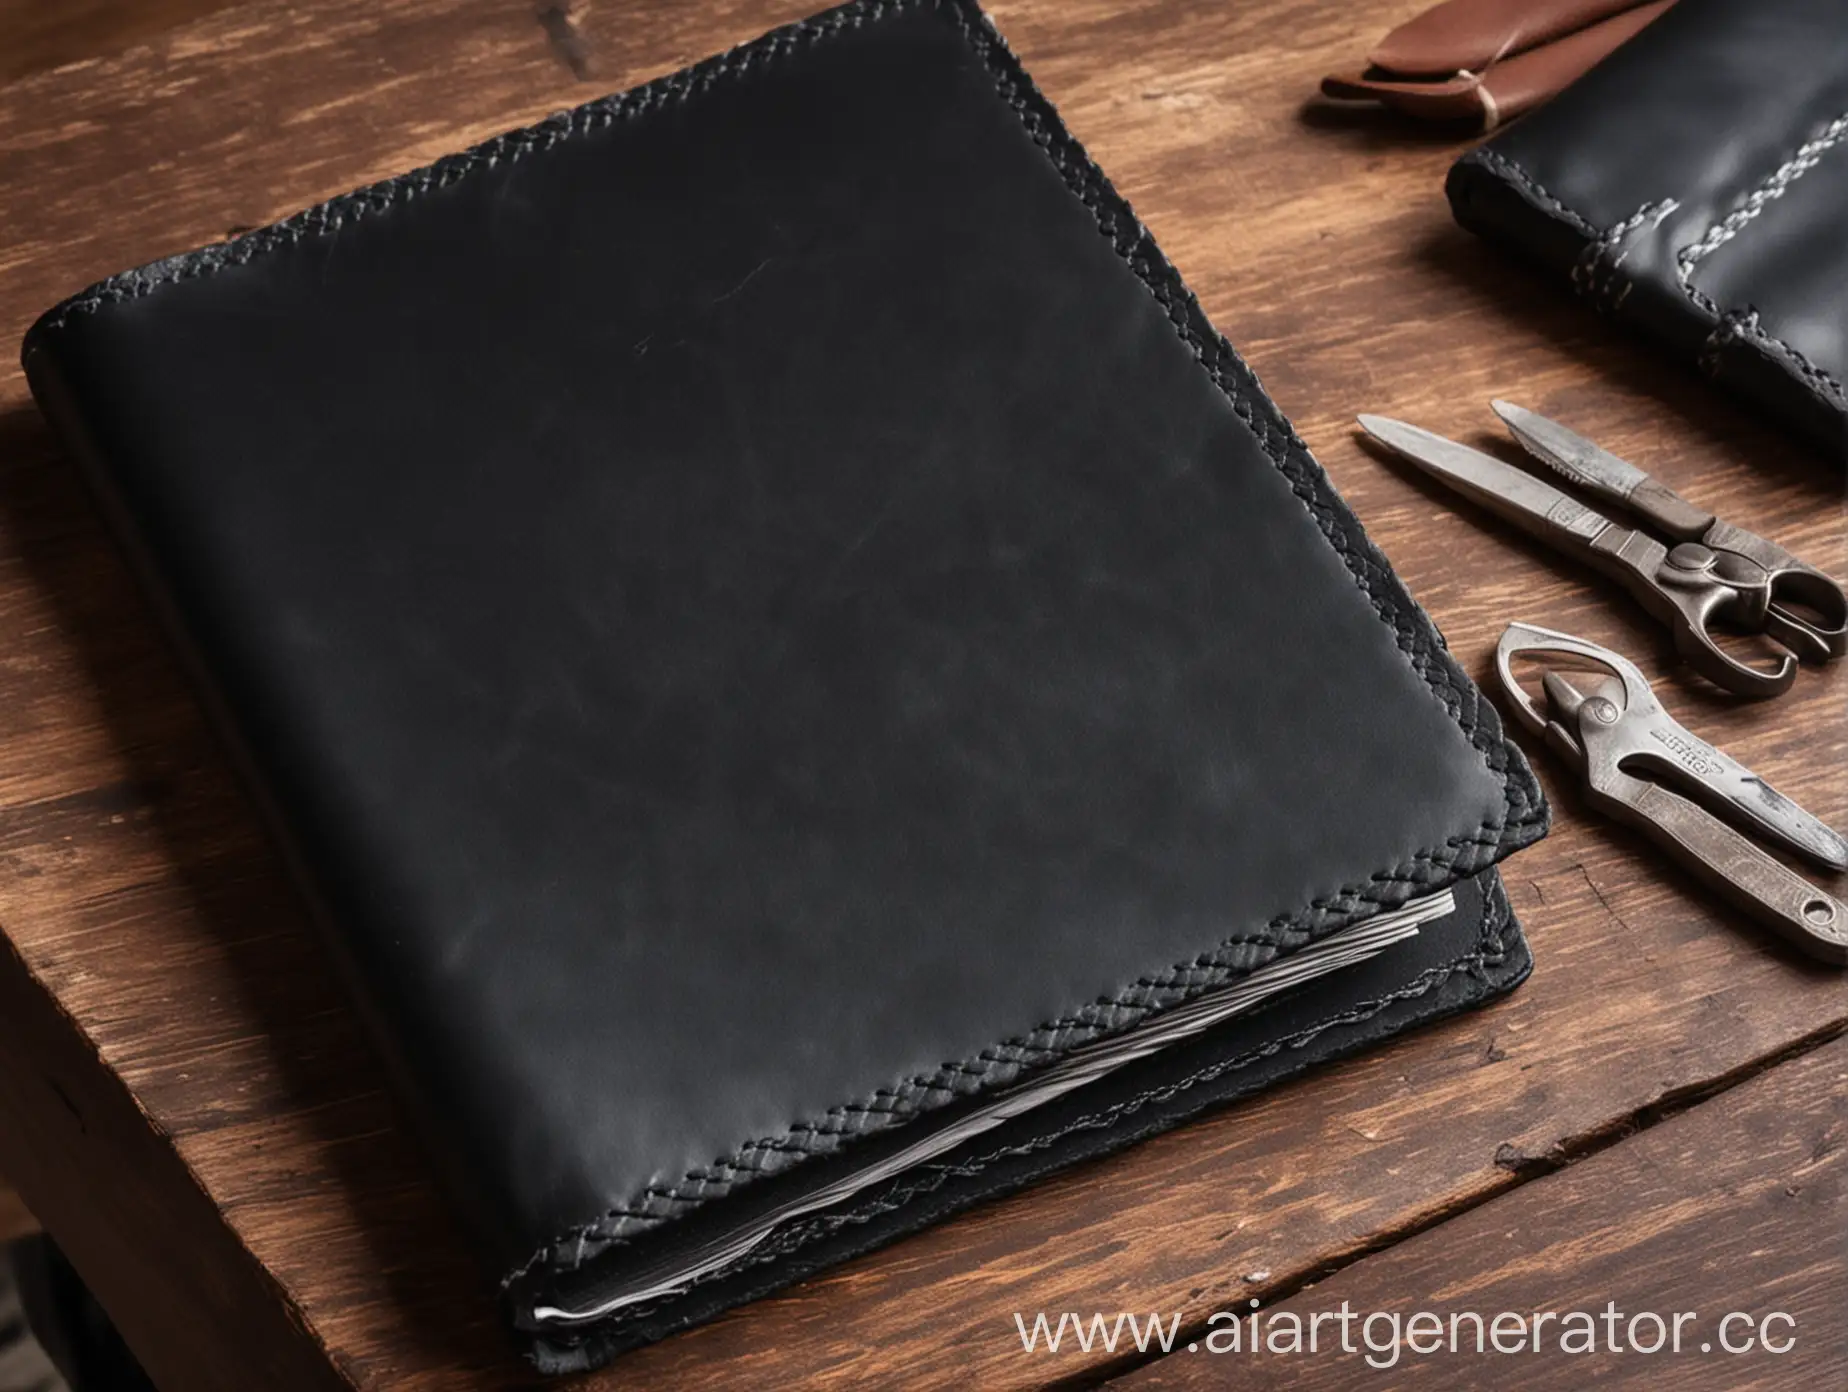 CloseUp-of-Handcrafted-Black-Leather-Passport-Cover-with-Seam-Detailing